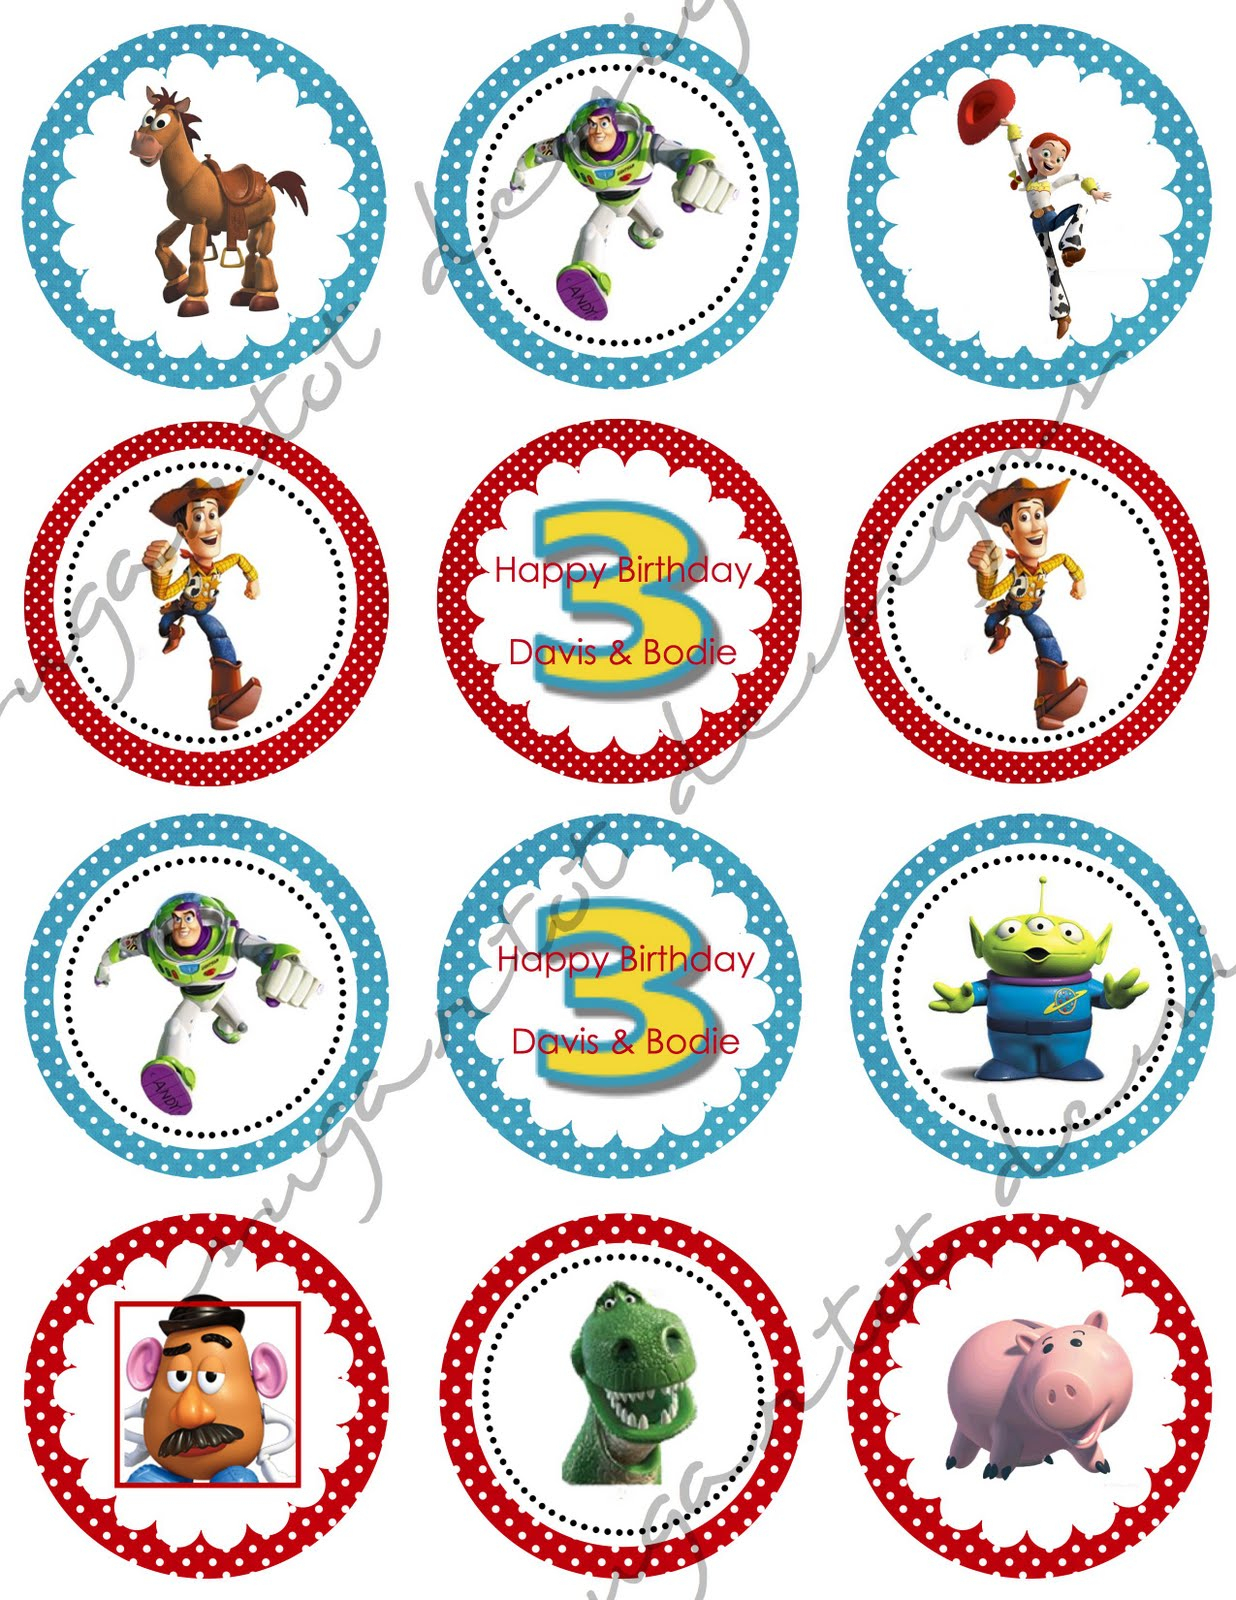 Sugartotdesigns: Toy Story 3 Party Invitations &amp;amp; Cupcake Toppers - Free Printable Toy Story 3 Birthday Invitations